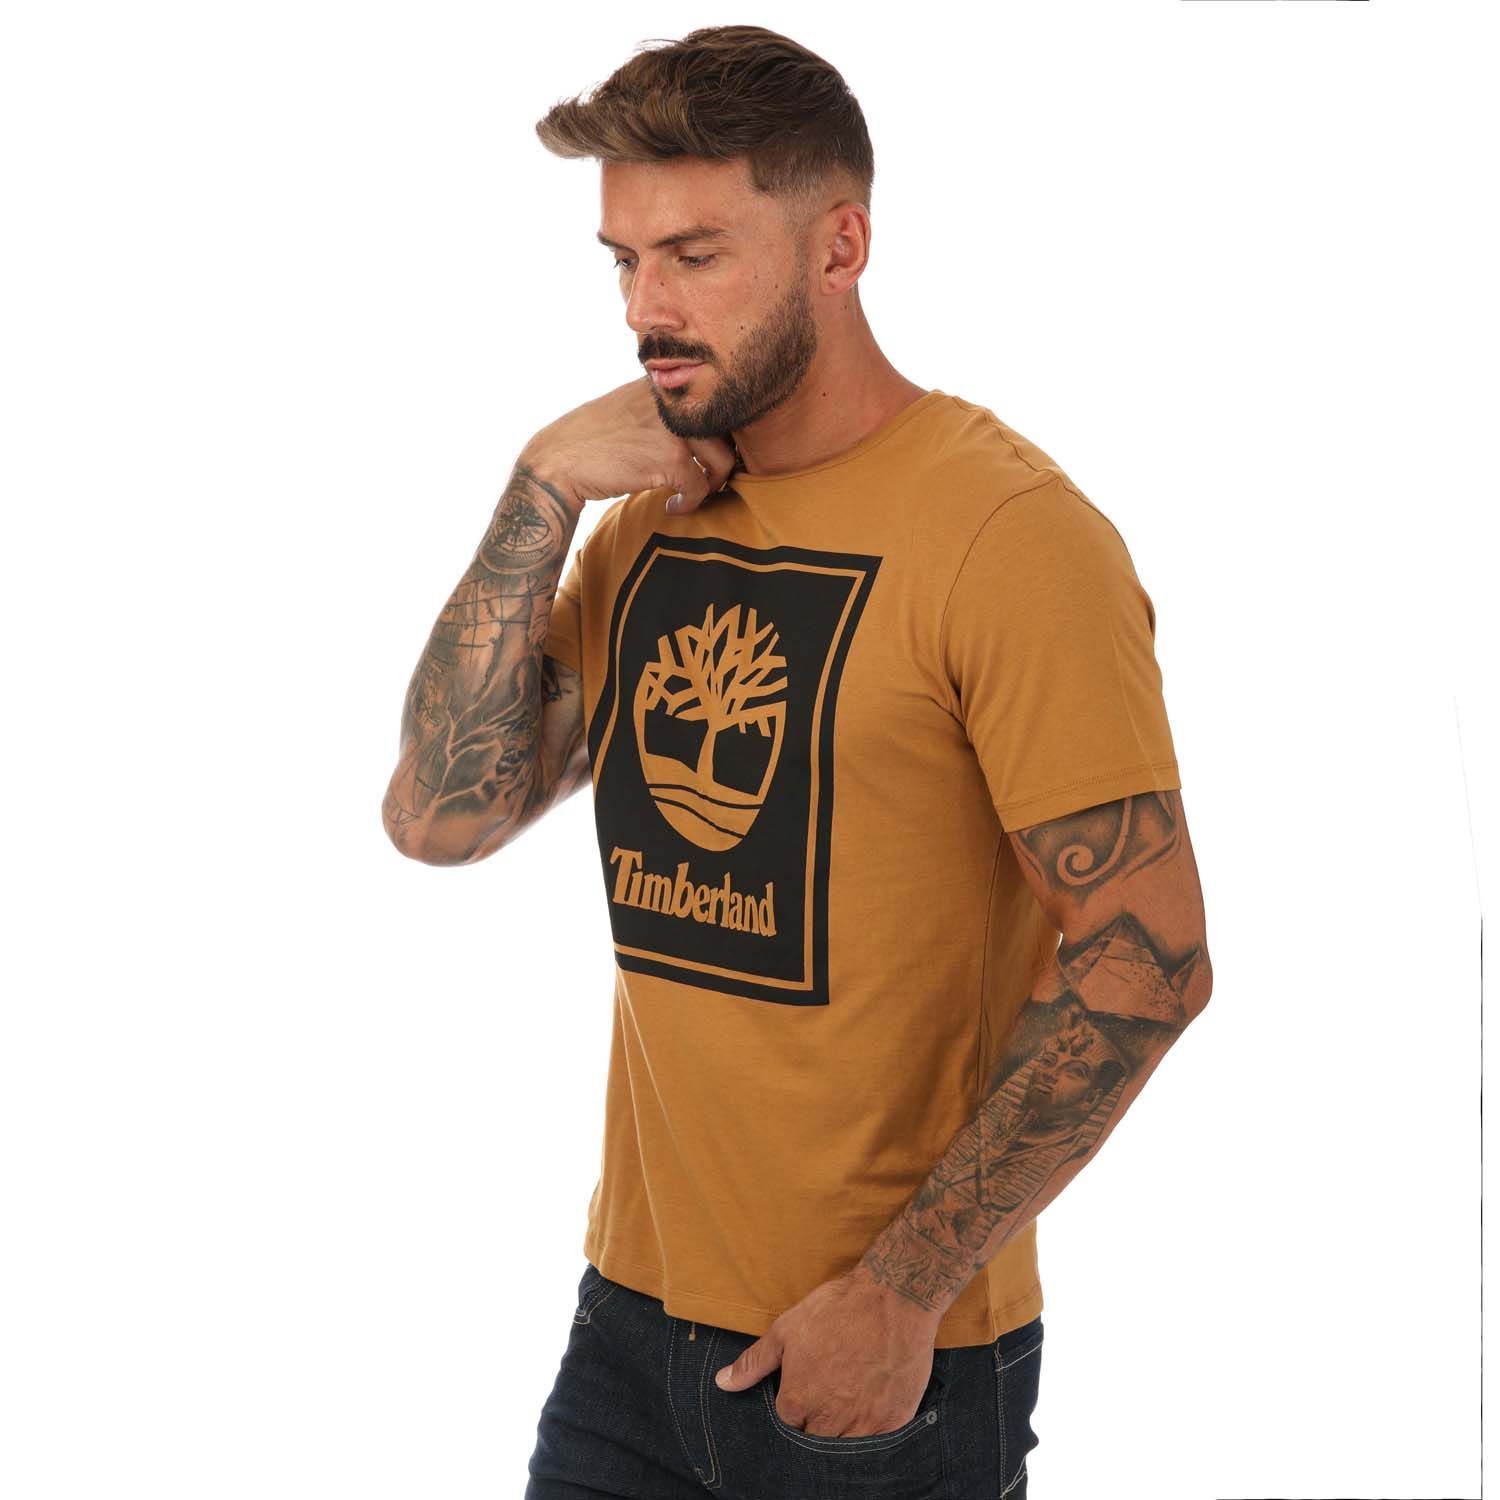 Mens Timberland Stack T- Shirt in wheat.- Ribbed crew neckline.- Short sleeves.- Logo print to chest.- Regular fit.- 100% Cotton. - Ref: A2AJ1P57